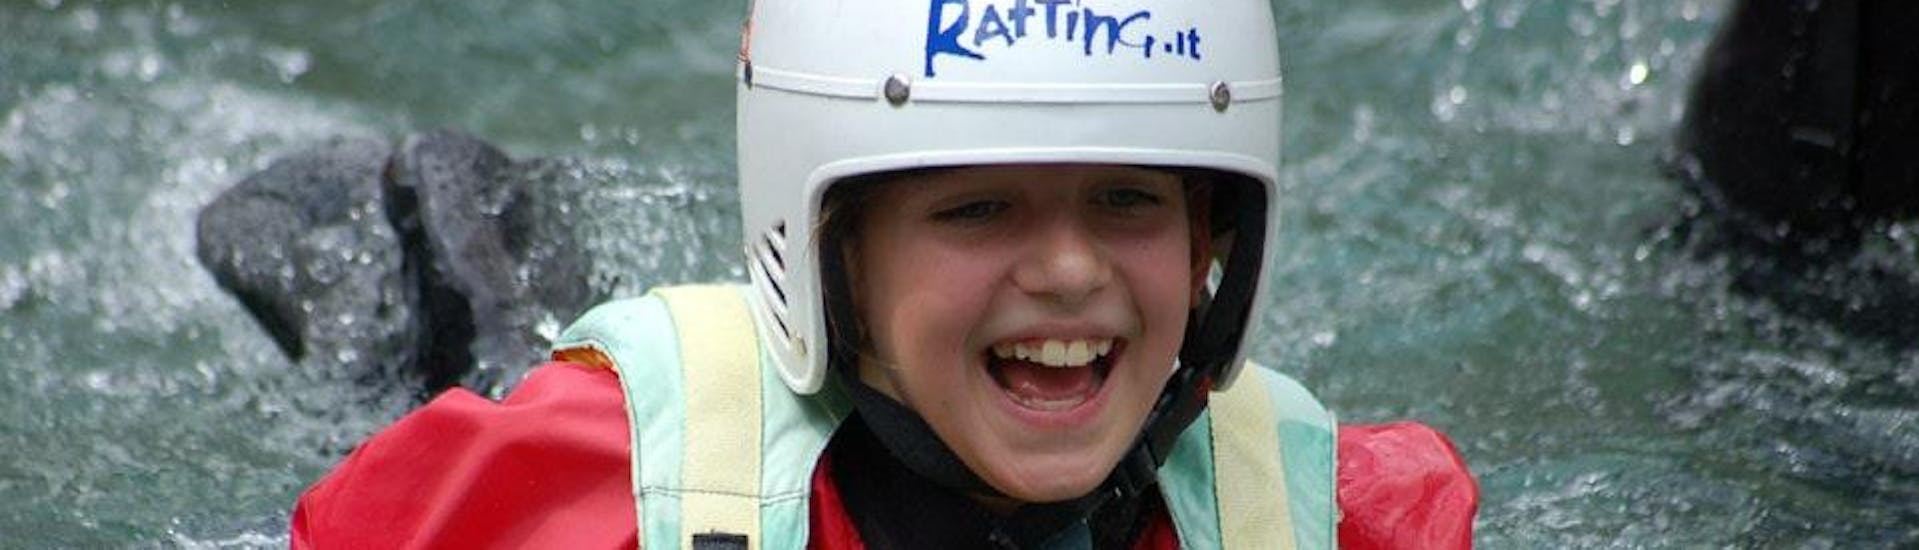 Rafting on the Sesia for Kids (6-12 y.) .